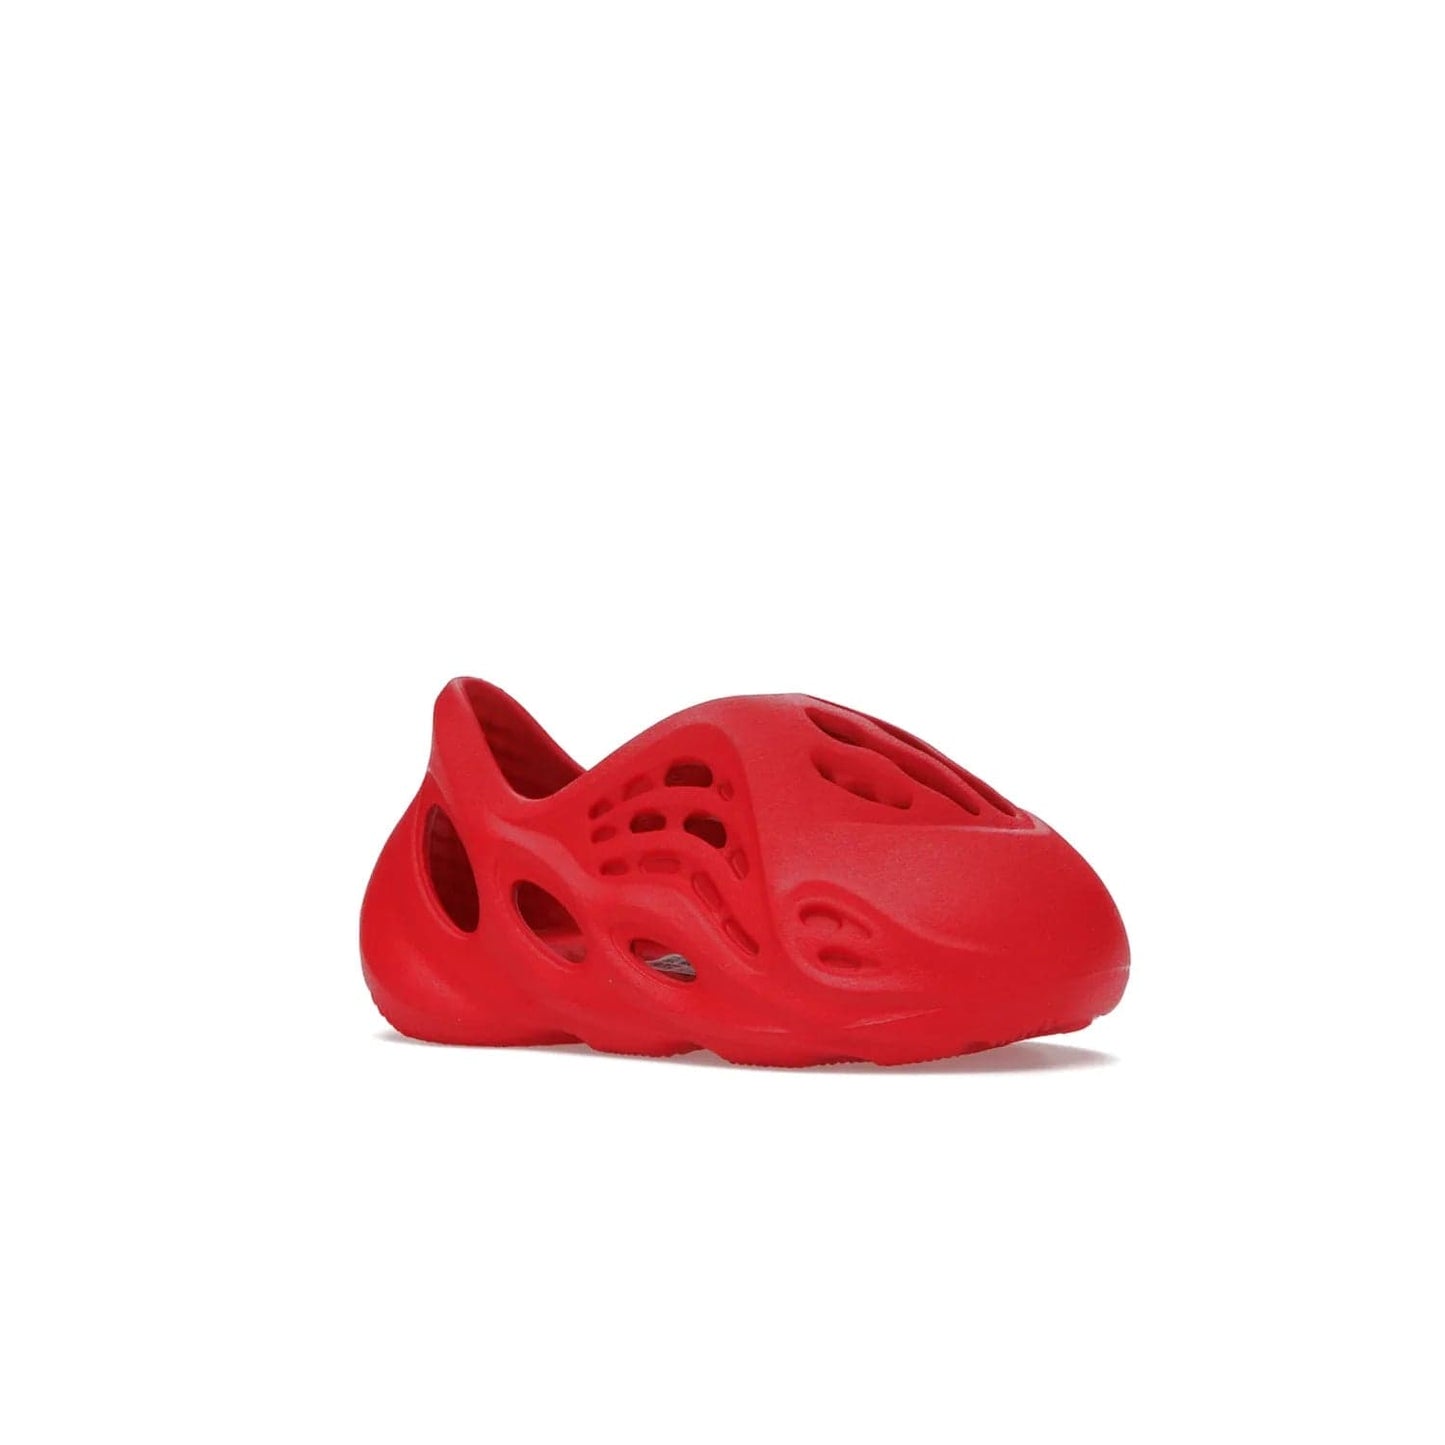 adidas Yeezy Foam RNNR Vermillion (Infants) - Image 4 - Only at www.BallersClubKickz.com - Adidas Yeezy Foam RNNR Vermillion (Infants) brings a vibrant monochromatic design and lightweight foam material to keep feet in optimal comfort. Signature details provide a finishing touch of flair.